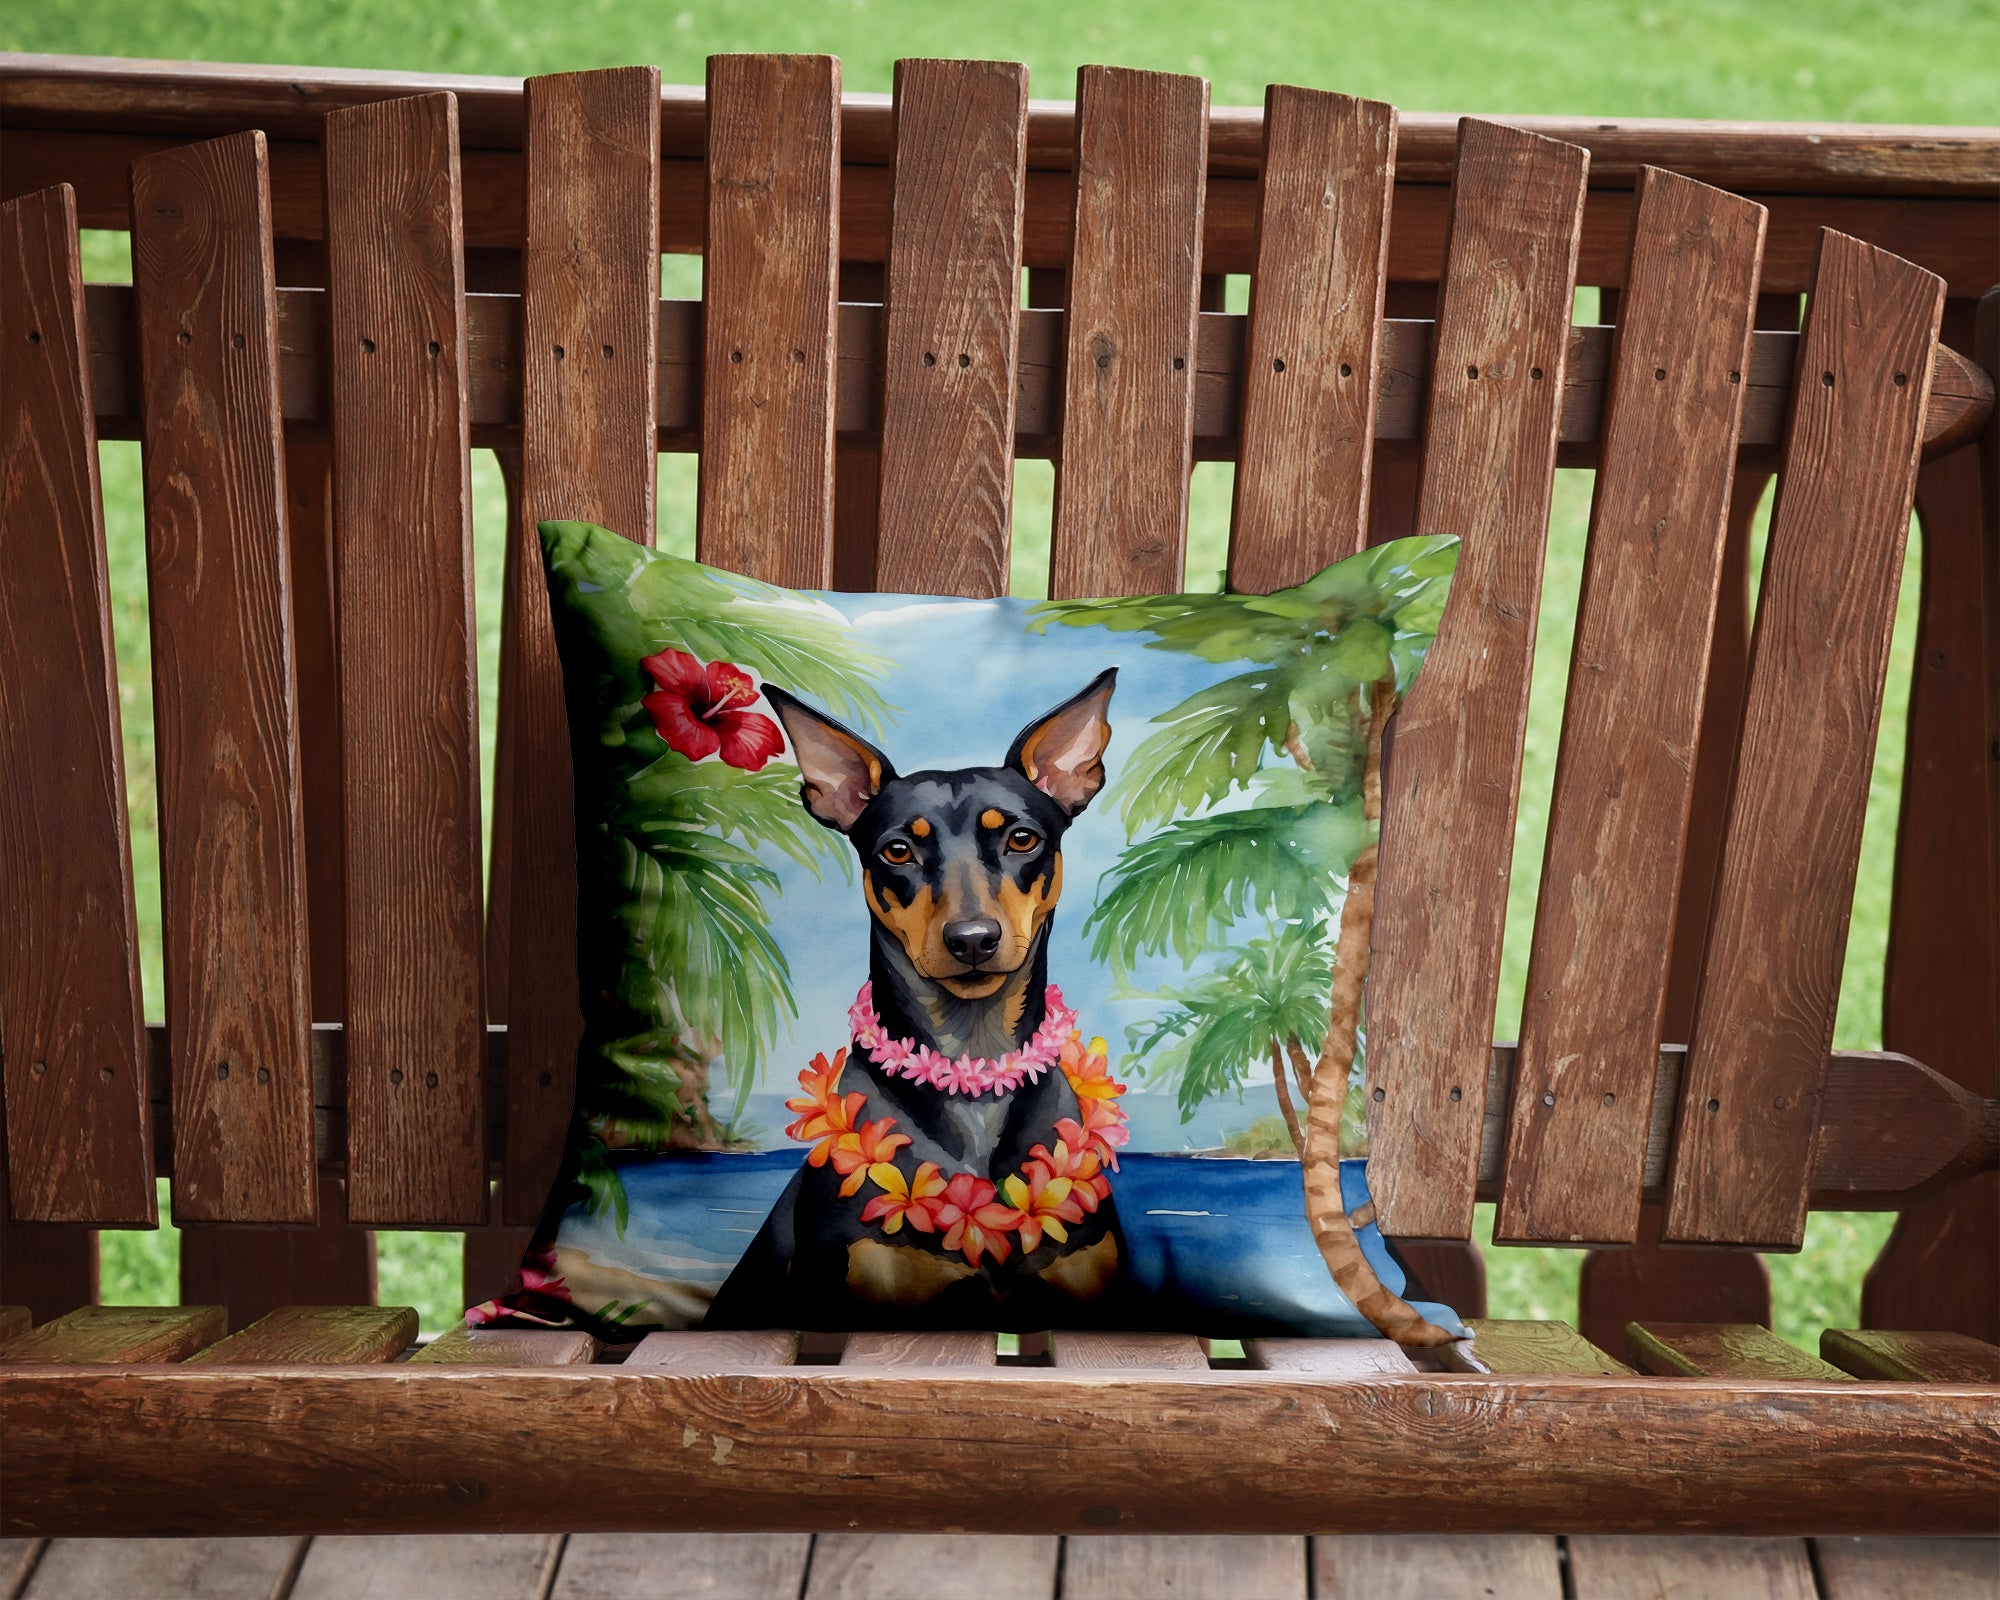 Buy this Manchester Terrier Luau Throw Pillow